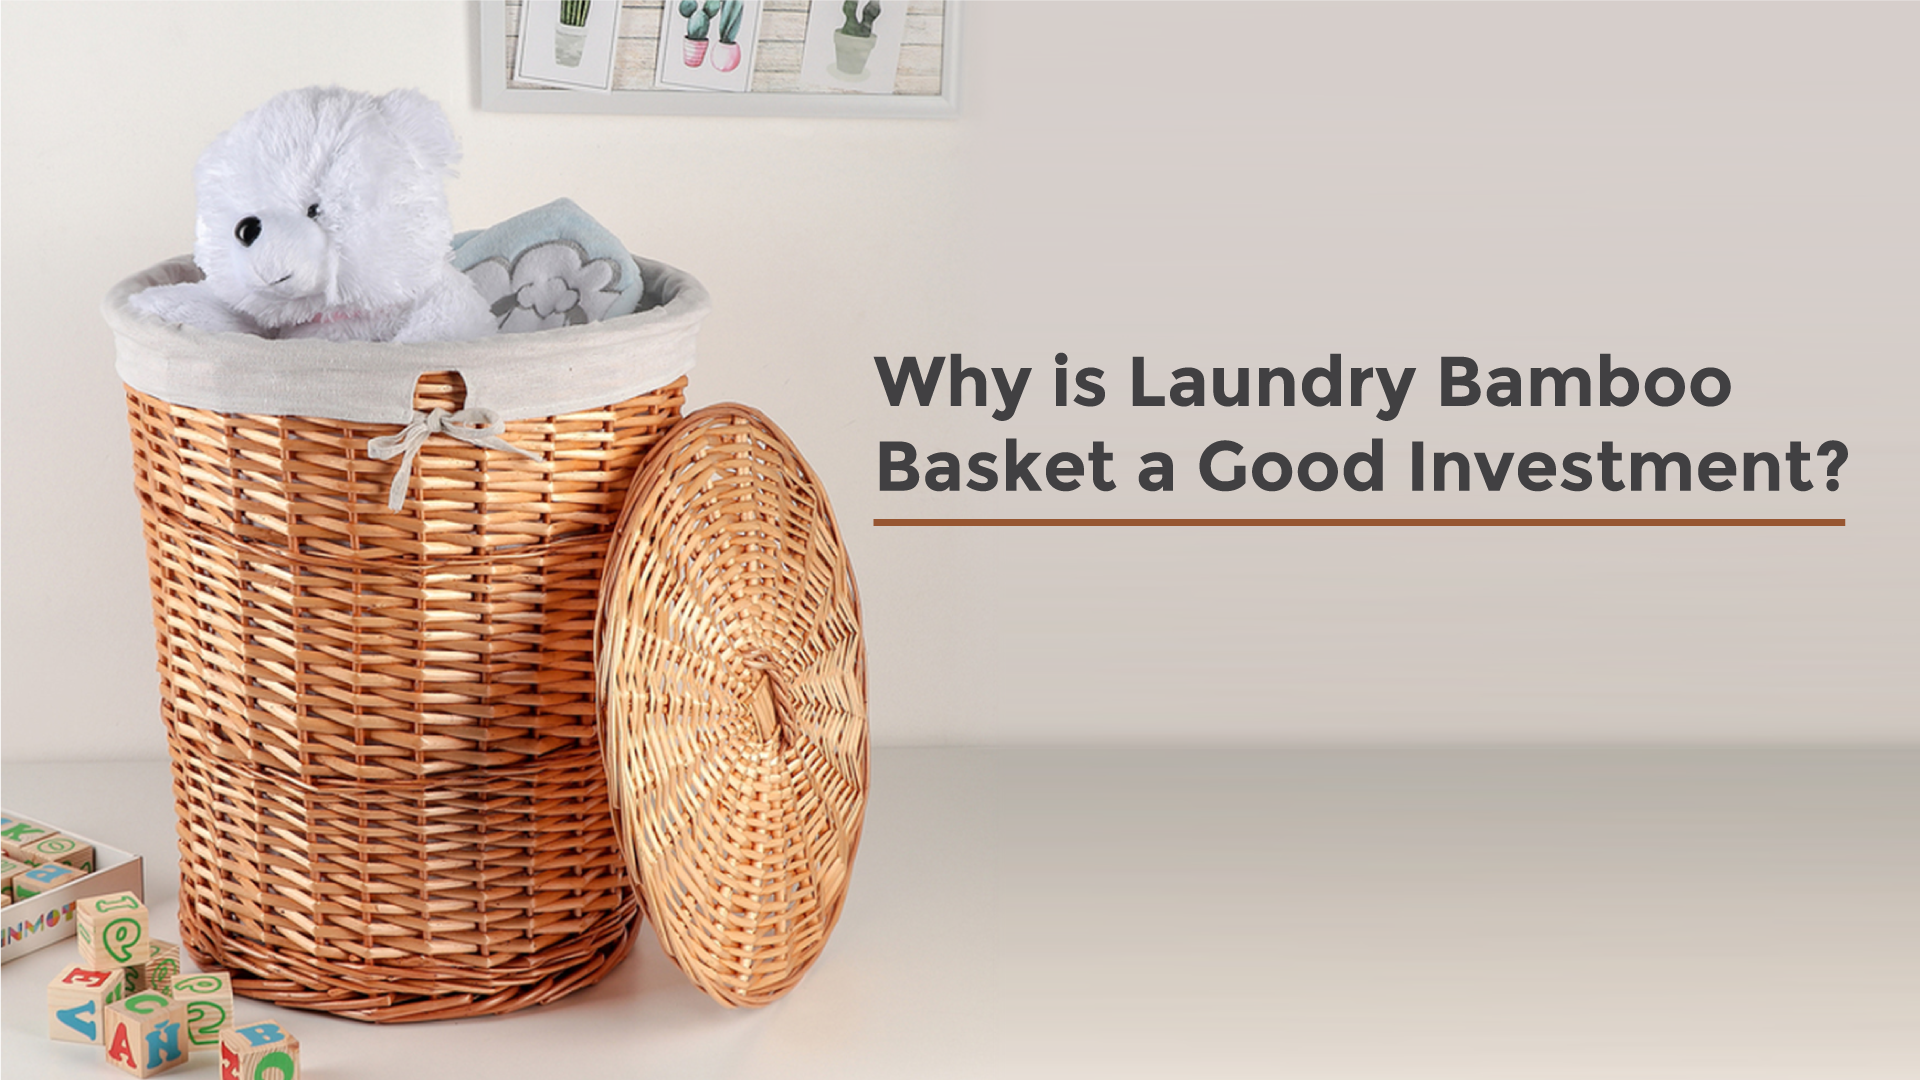 Why is Laundry Bamboo Basket a Good Investment?